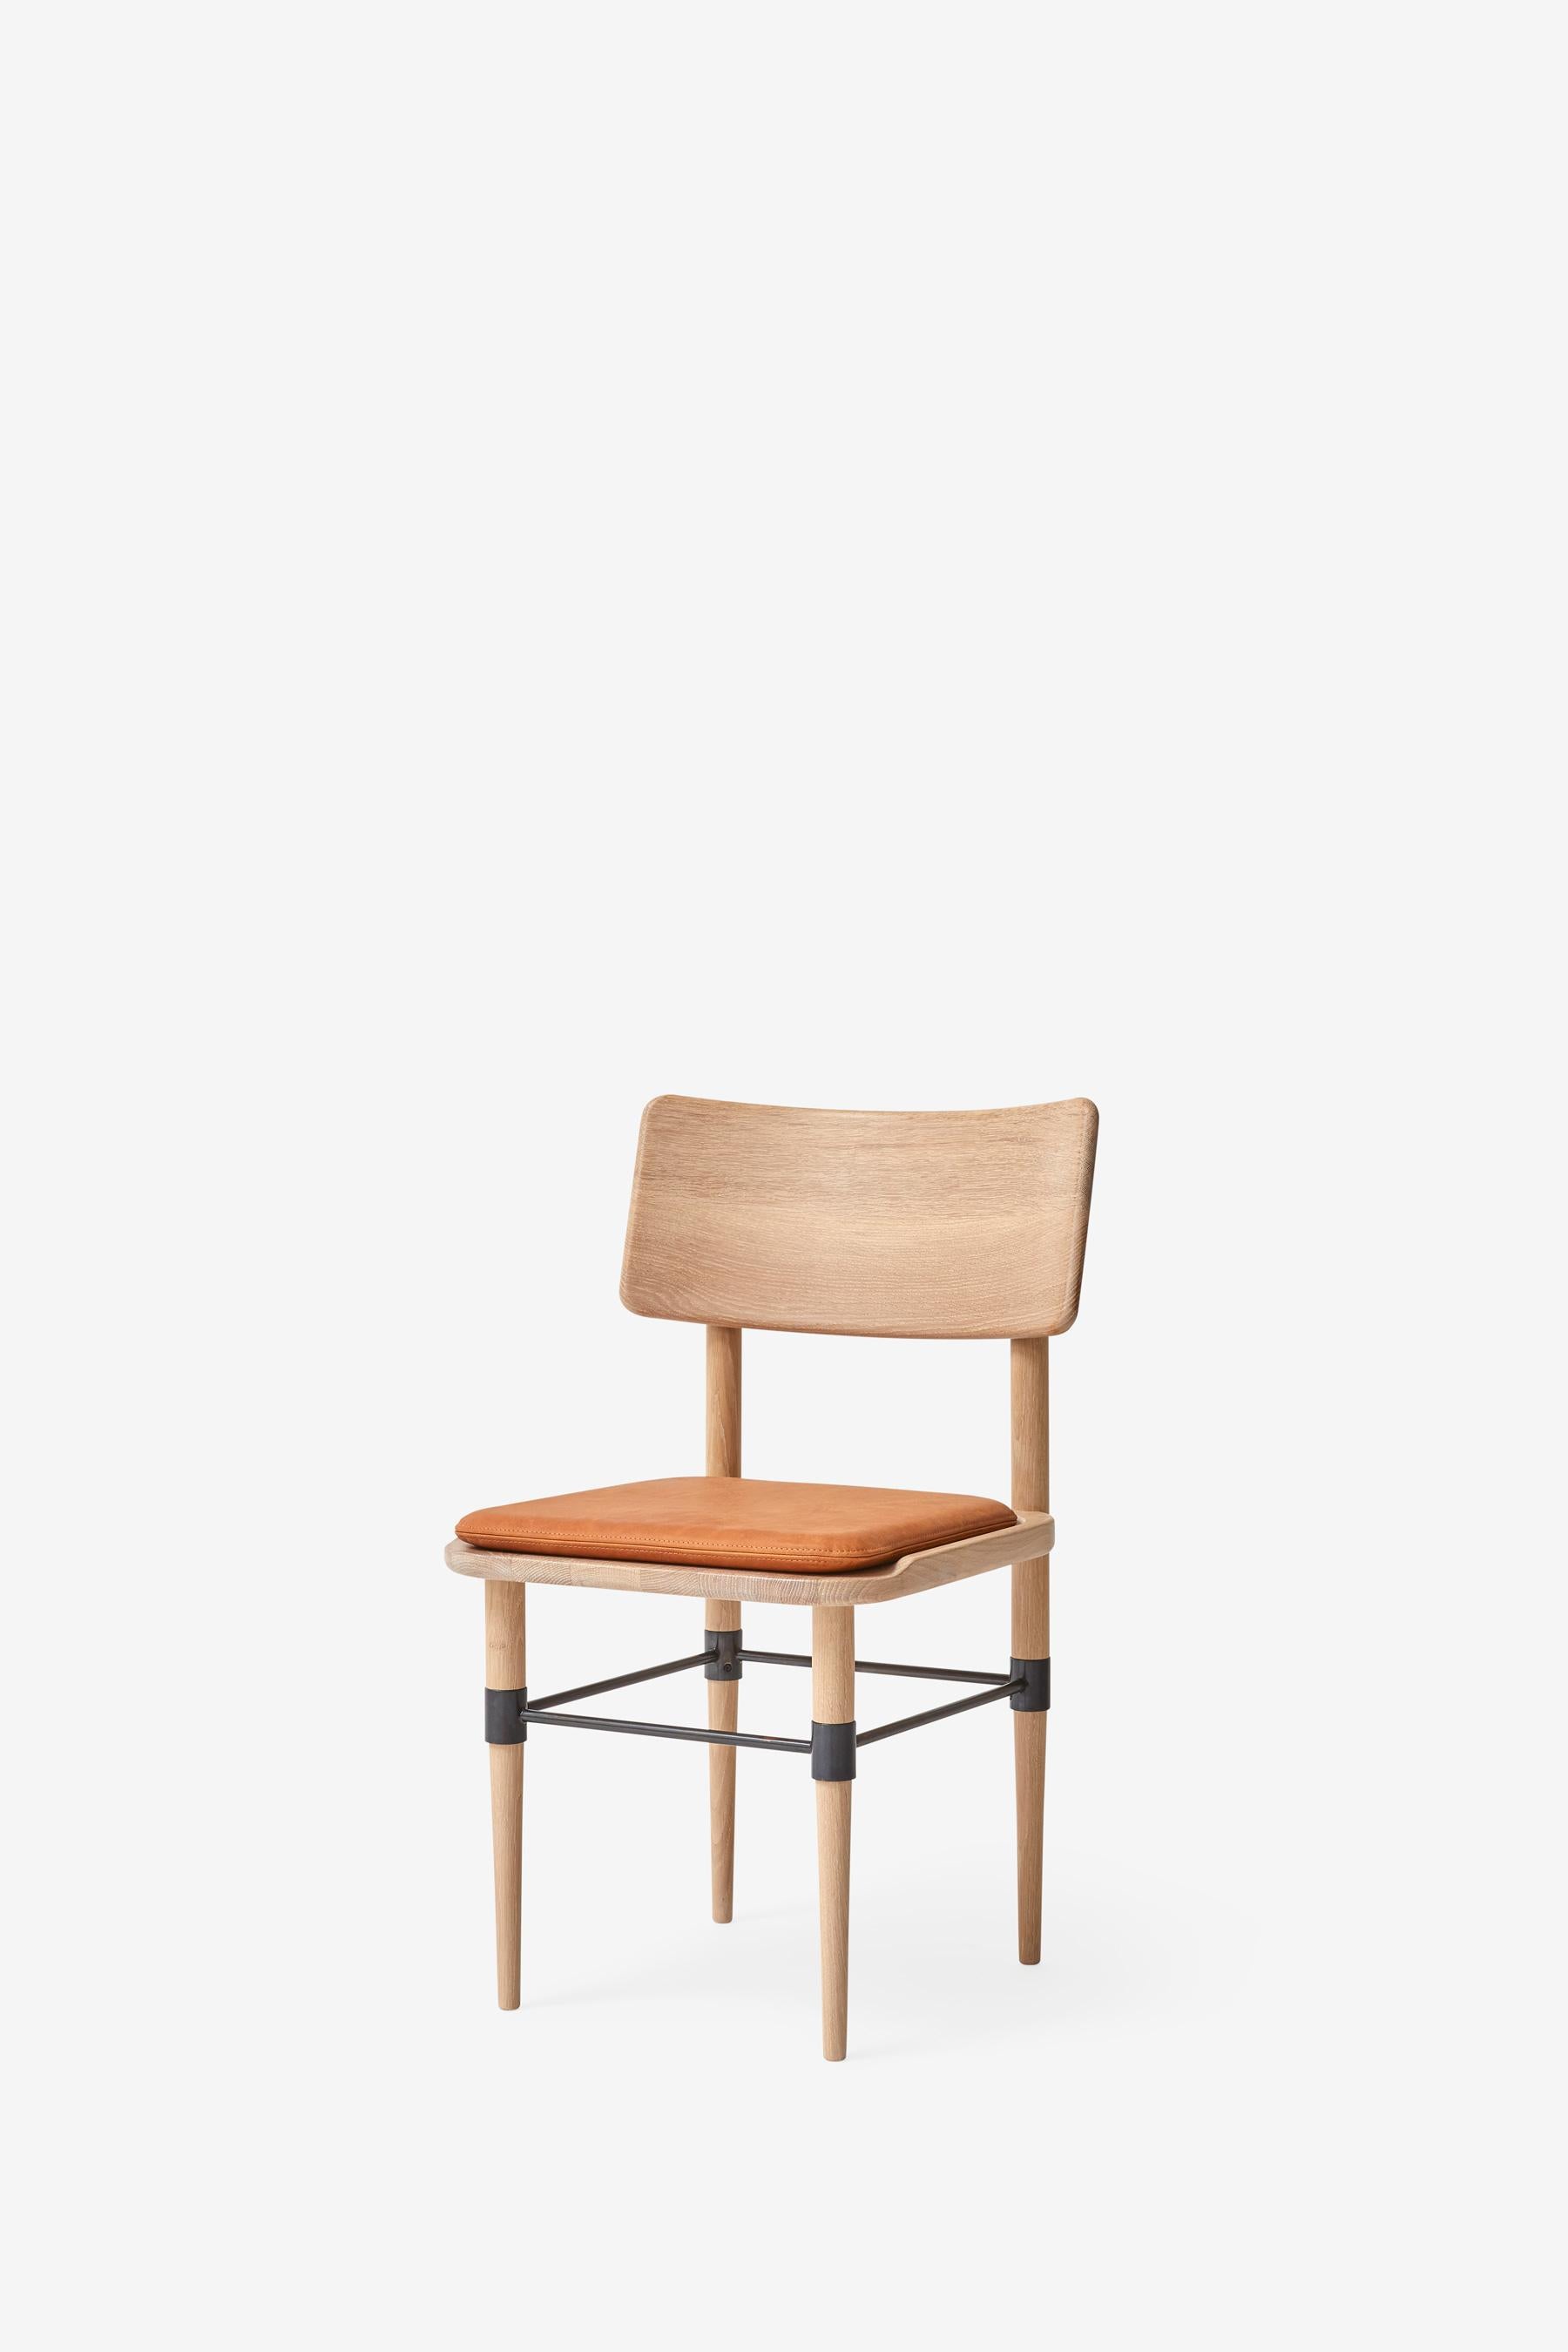 Contemporary MG101 Dining chair in light oak by Malte Gormsen Design by Space Copenhagen For Sale